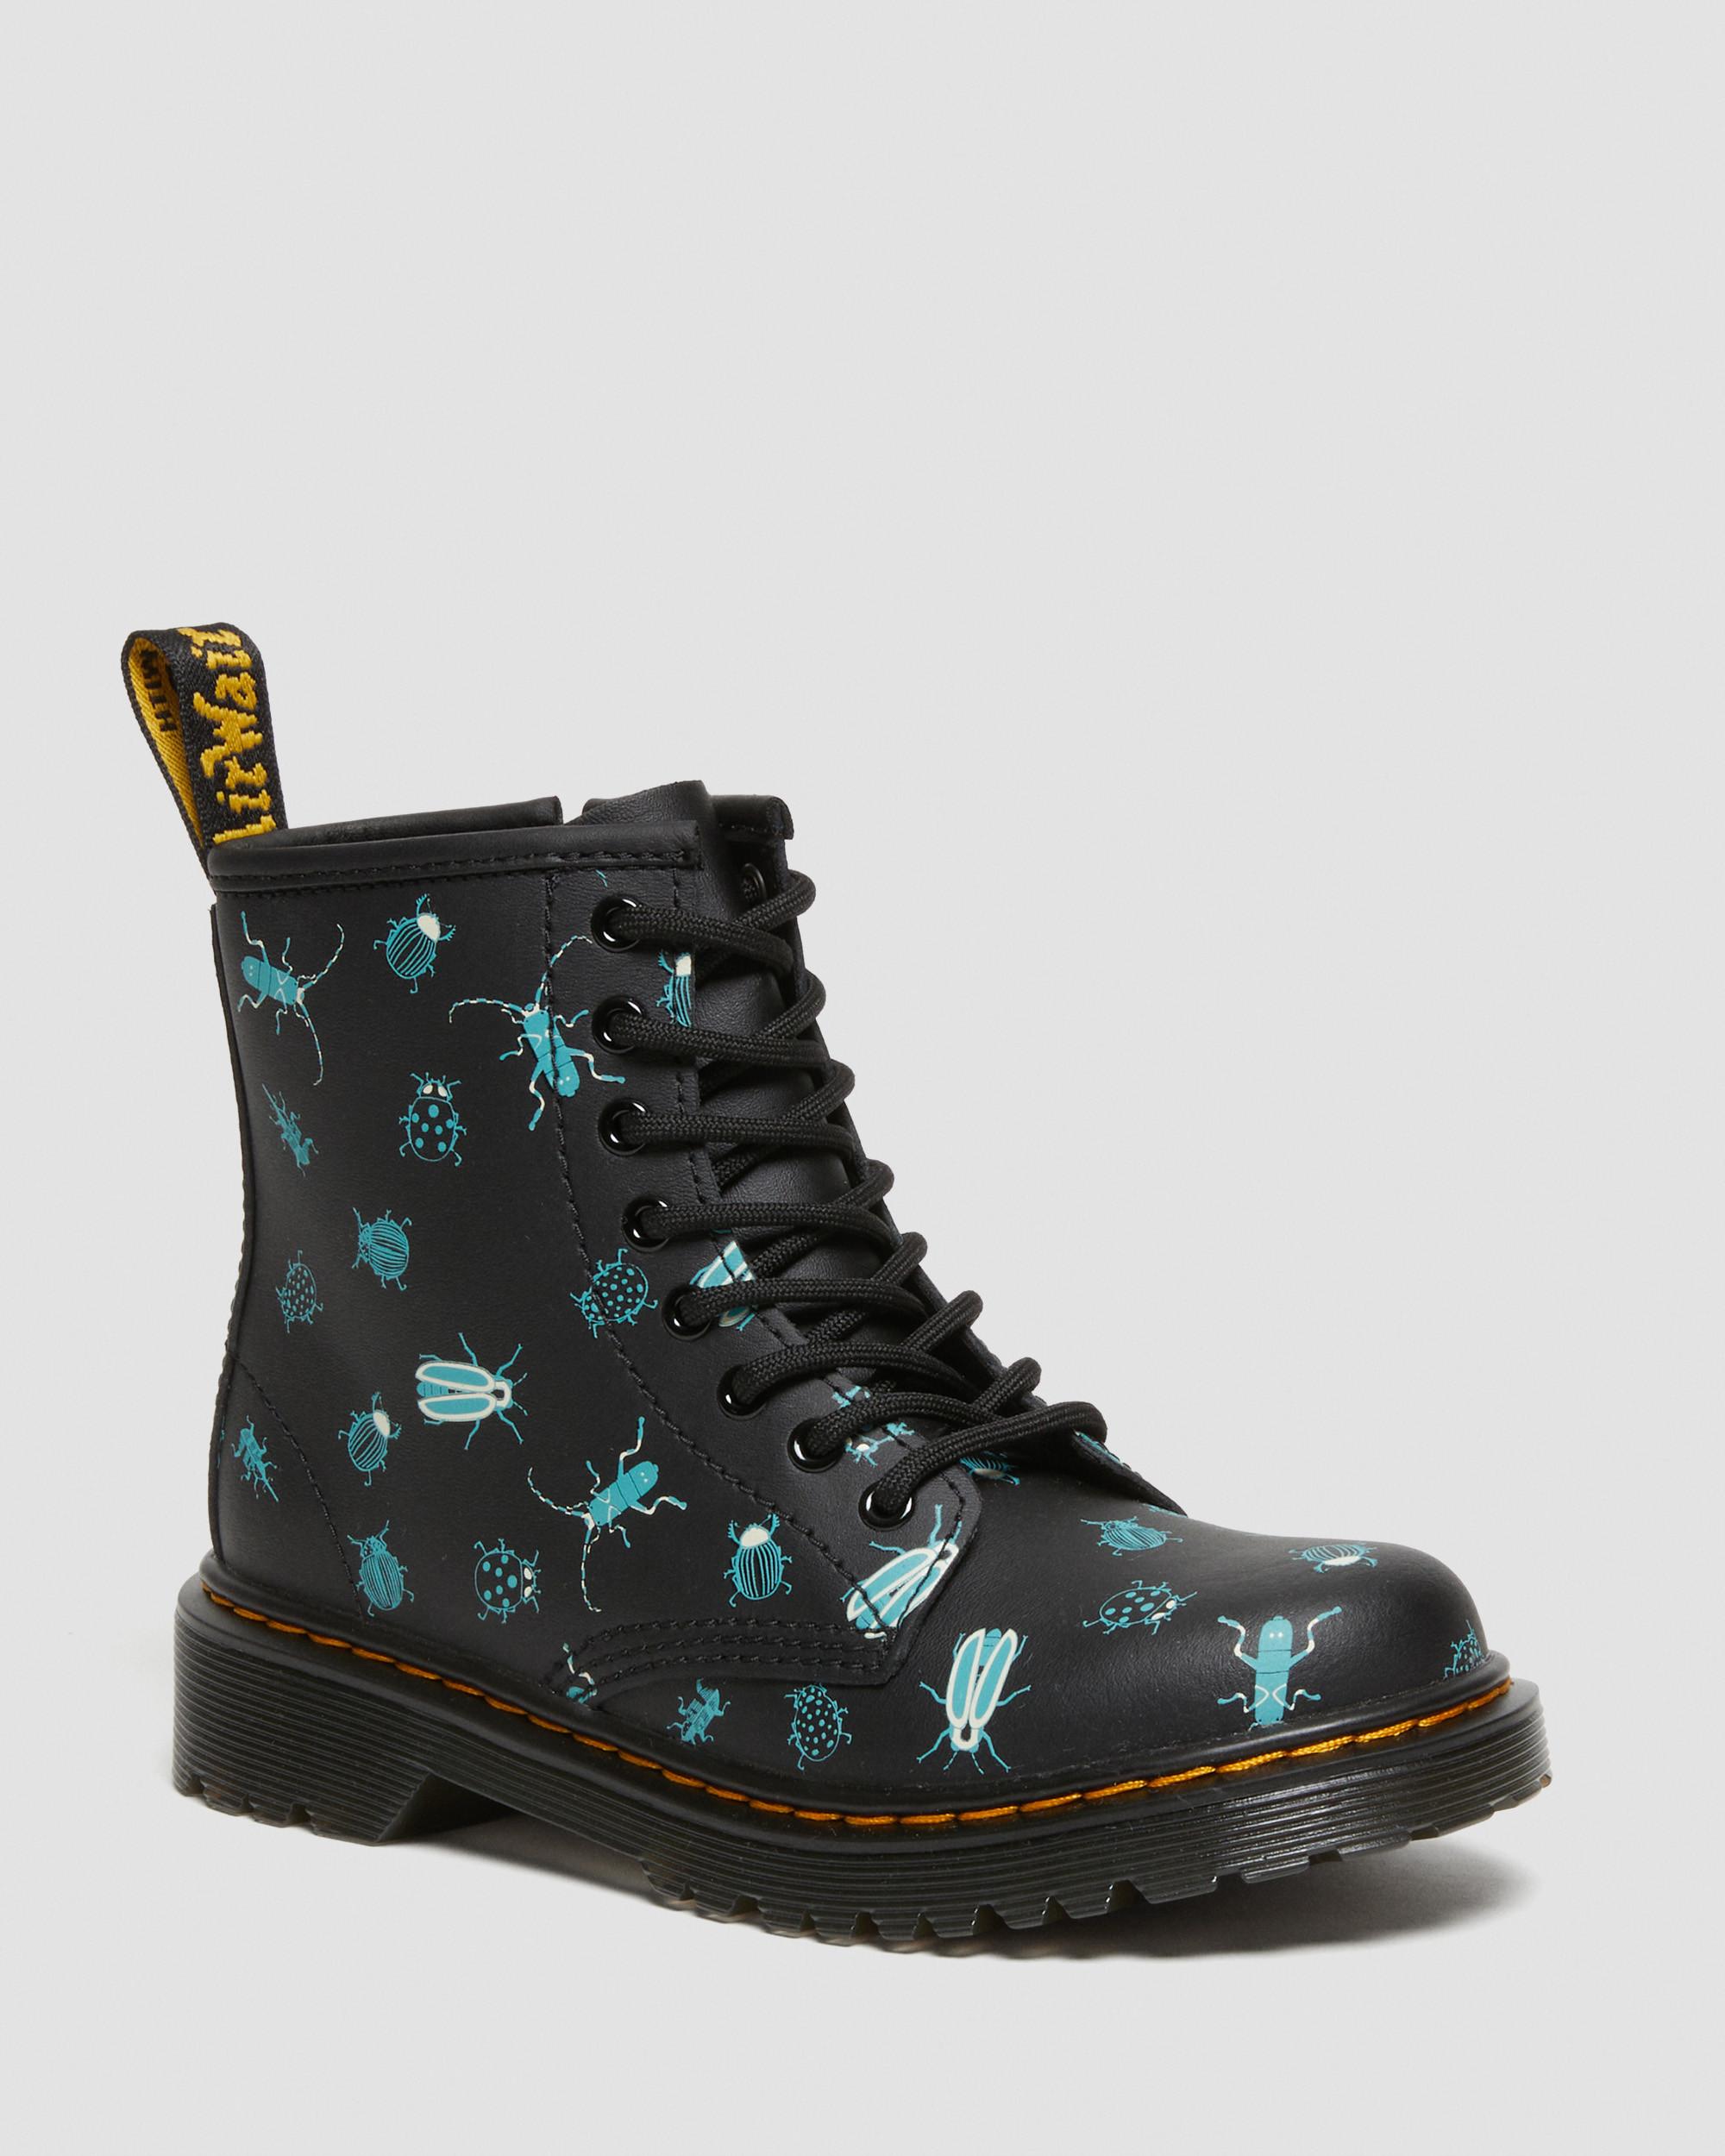 DR. MARTENS' JUNIOR 1460 GLOW IN THE DARK BUGS LACE UP BOOTS